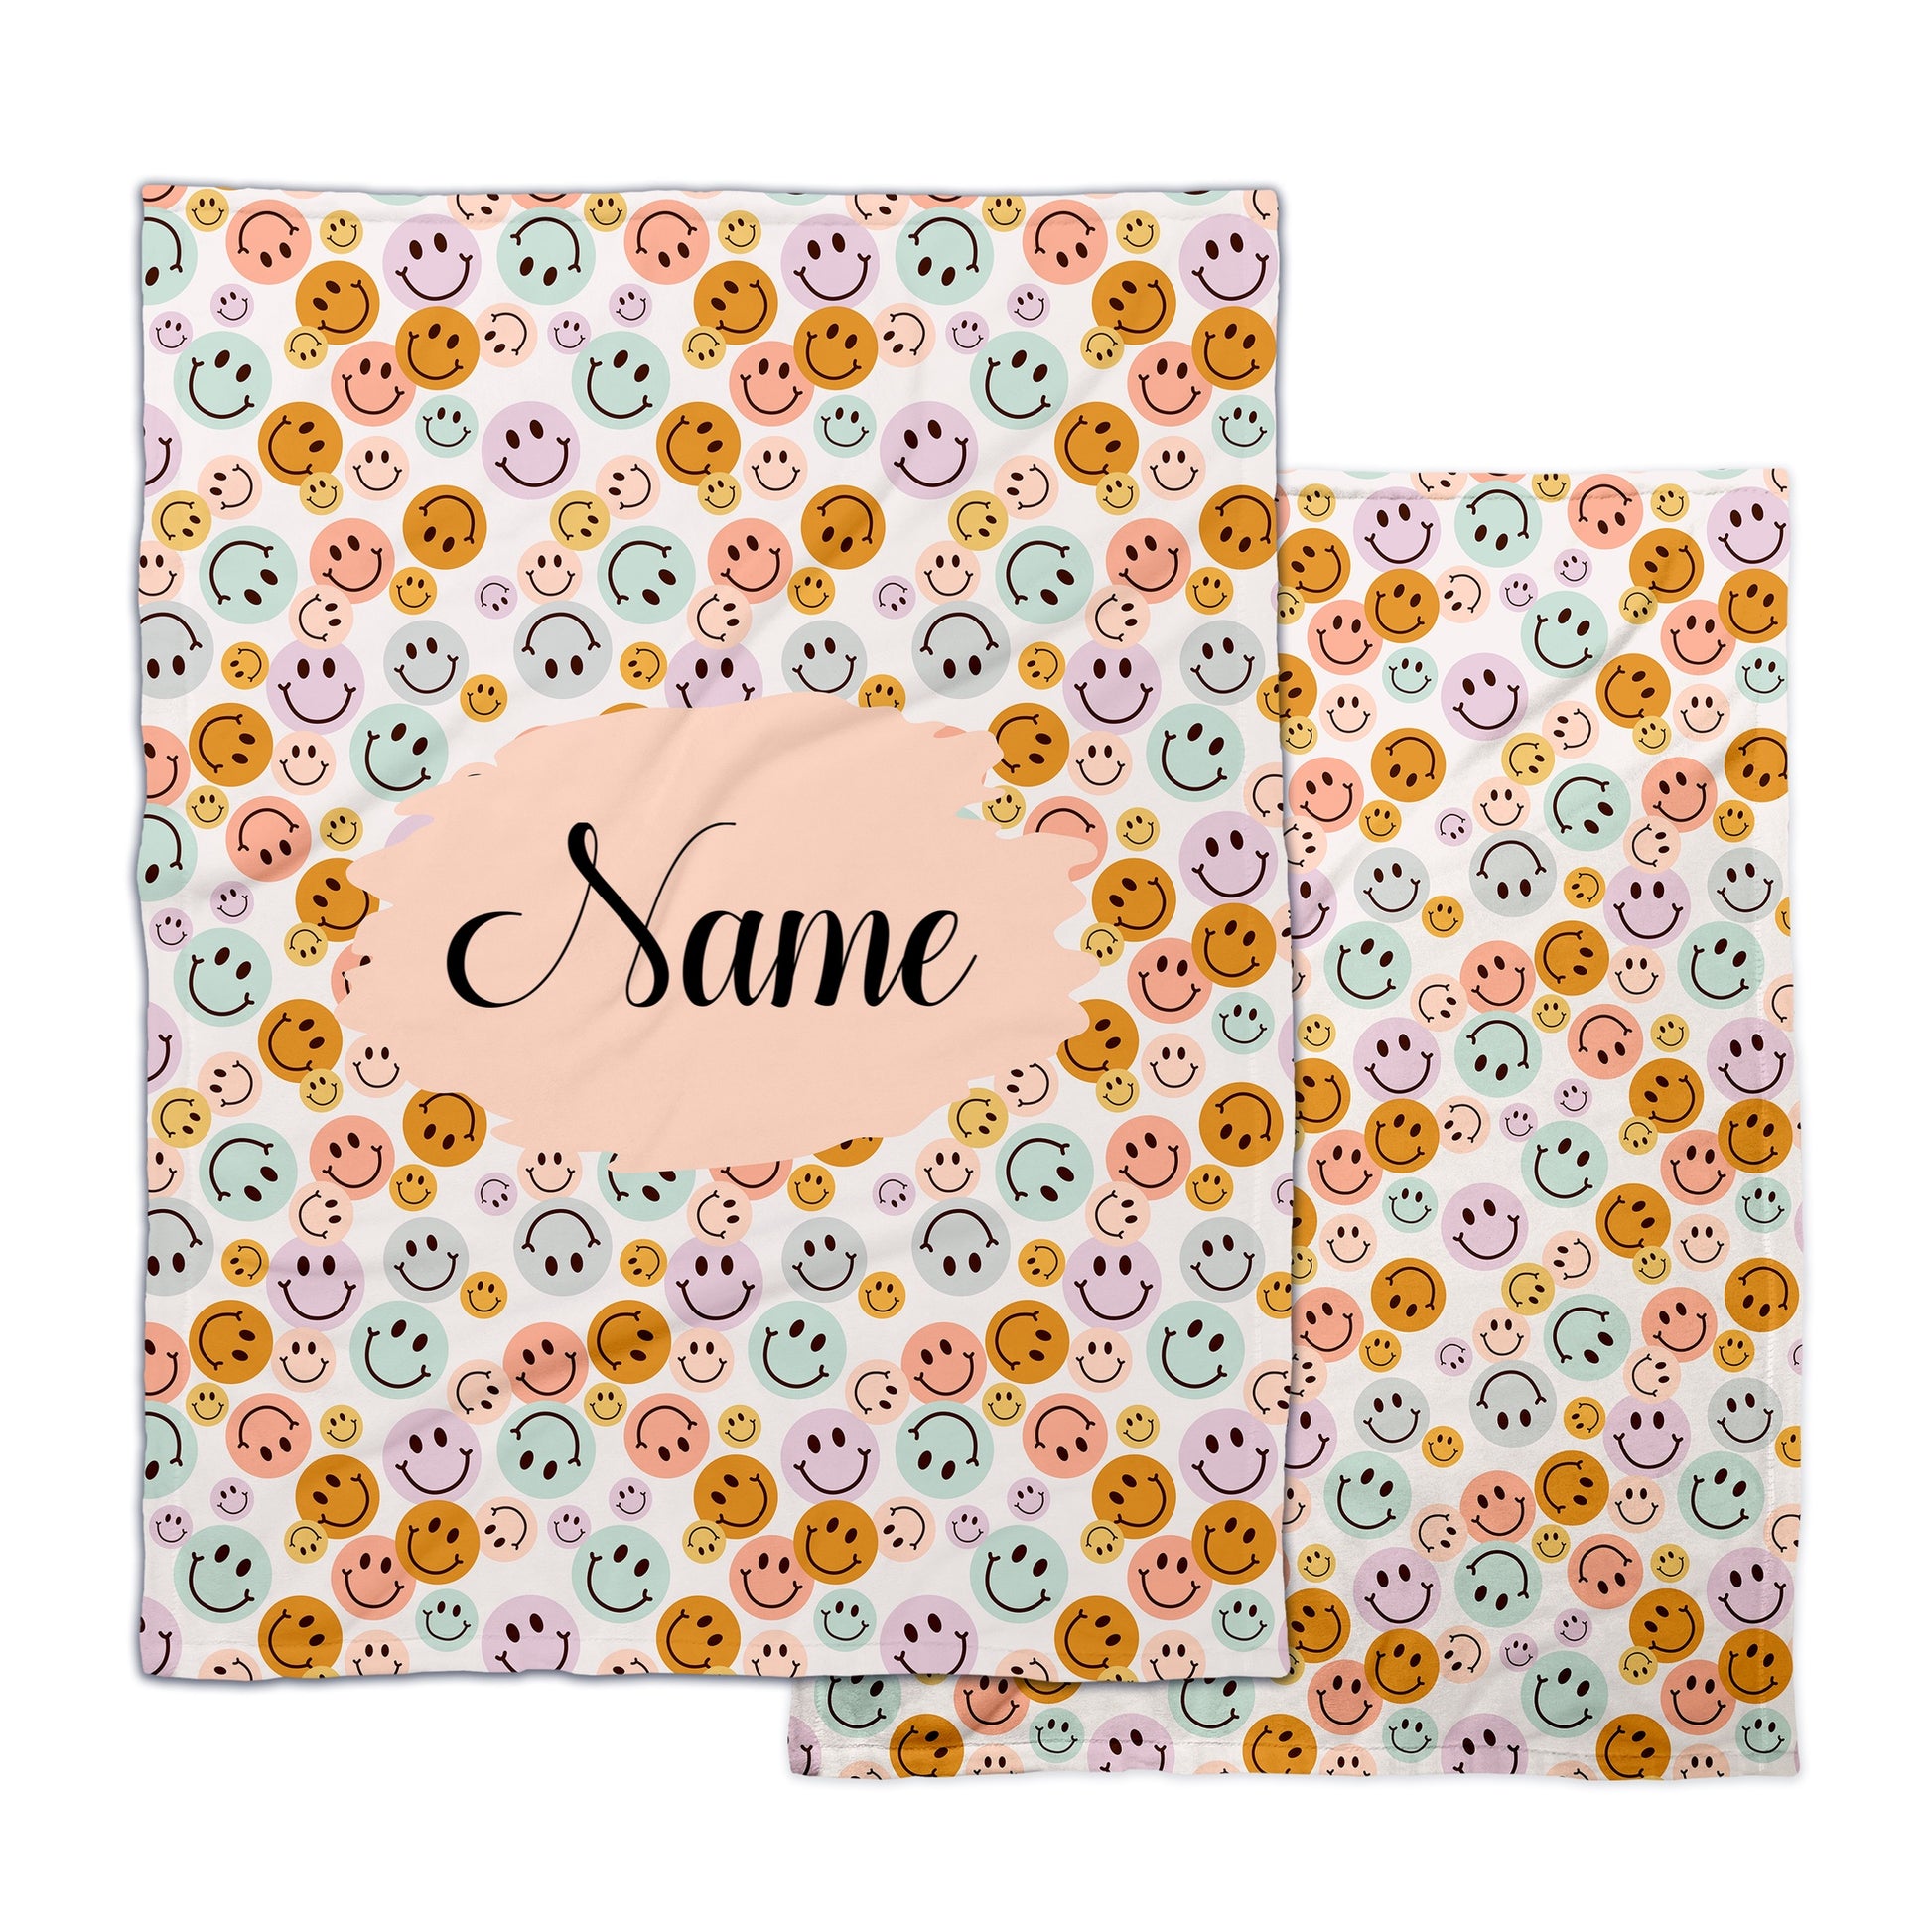 Personalized Name Blanket - Smiley Faces in Pink, Peach, Aqua and Yellow - Custom Printed Fleece Blanket - Christmas Gift